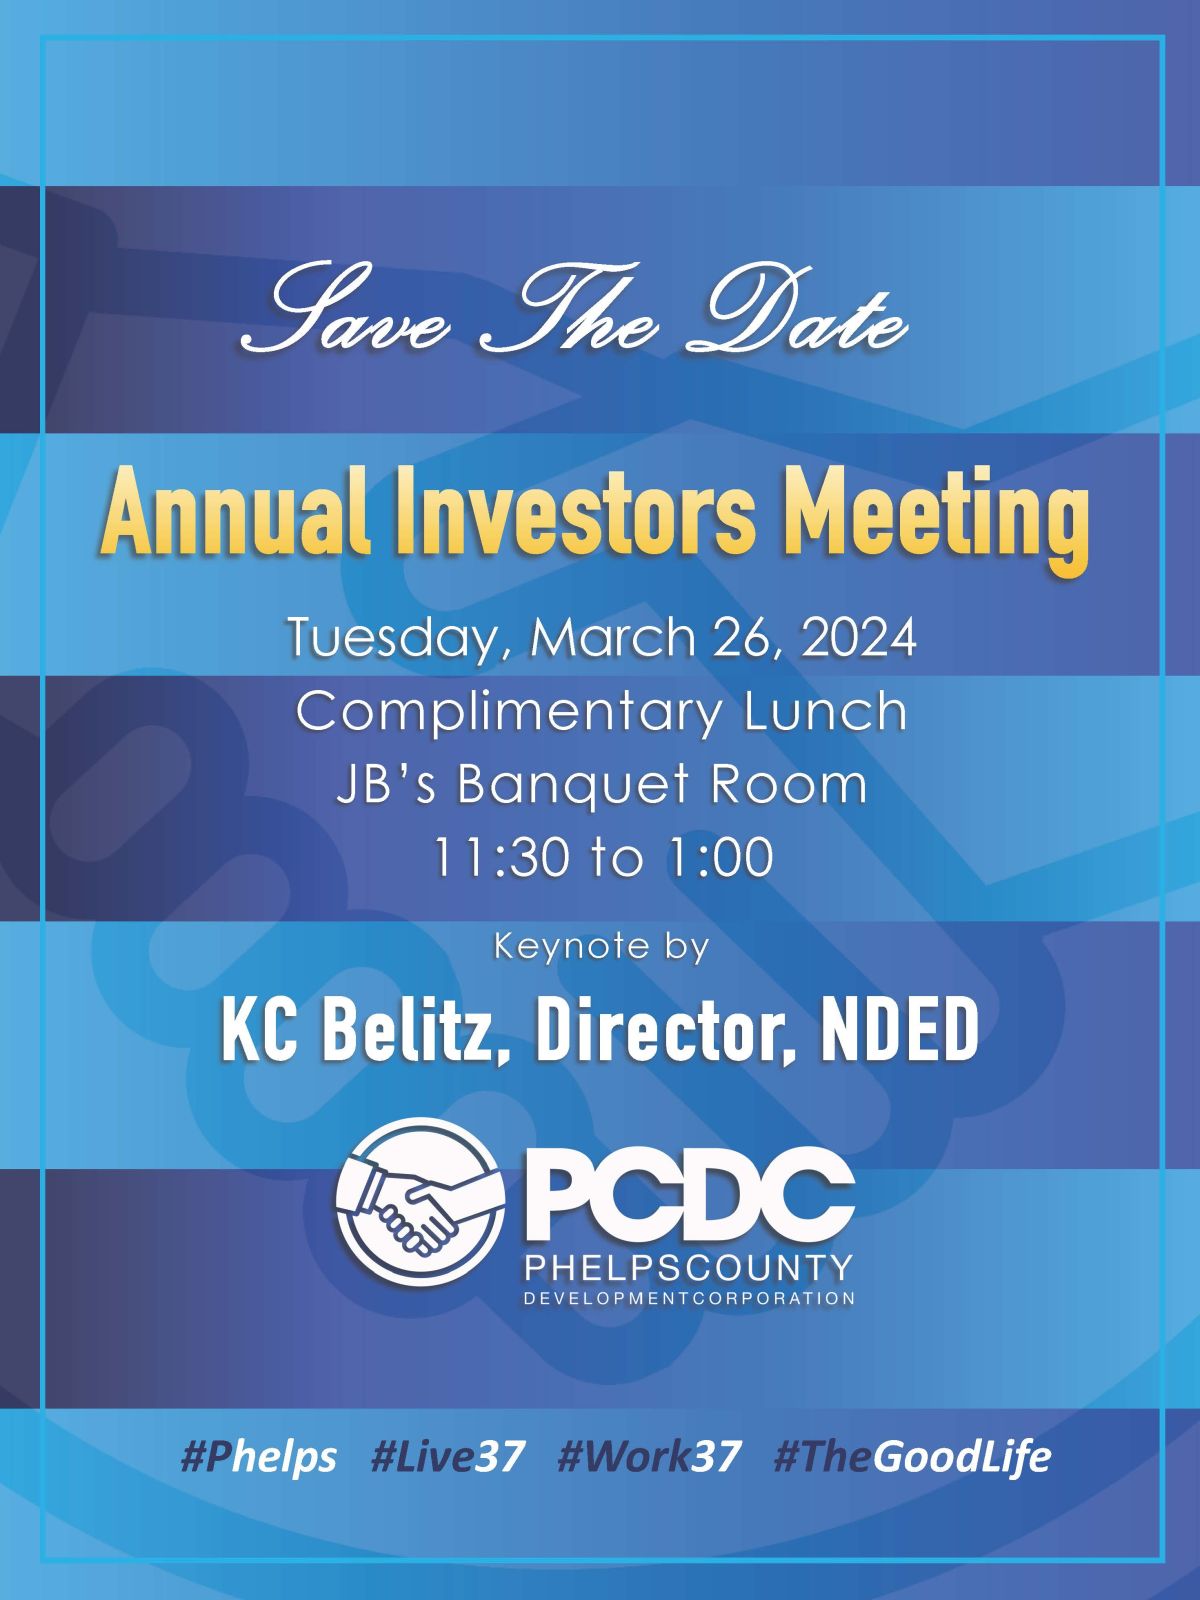 Click the Holdrege Welcomes NDED Director For PCDC Annual Meeting Slide Photo to Open